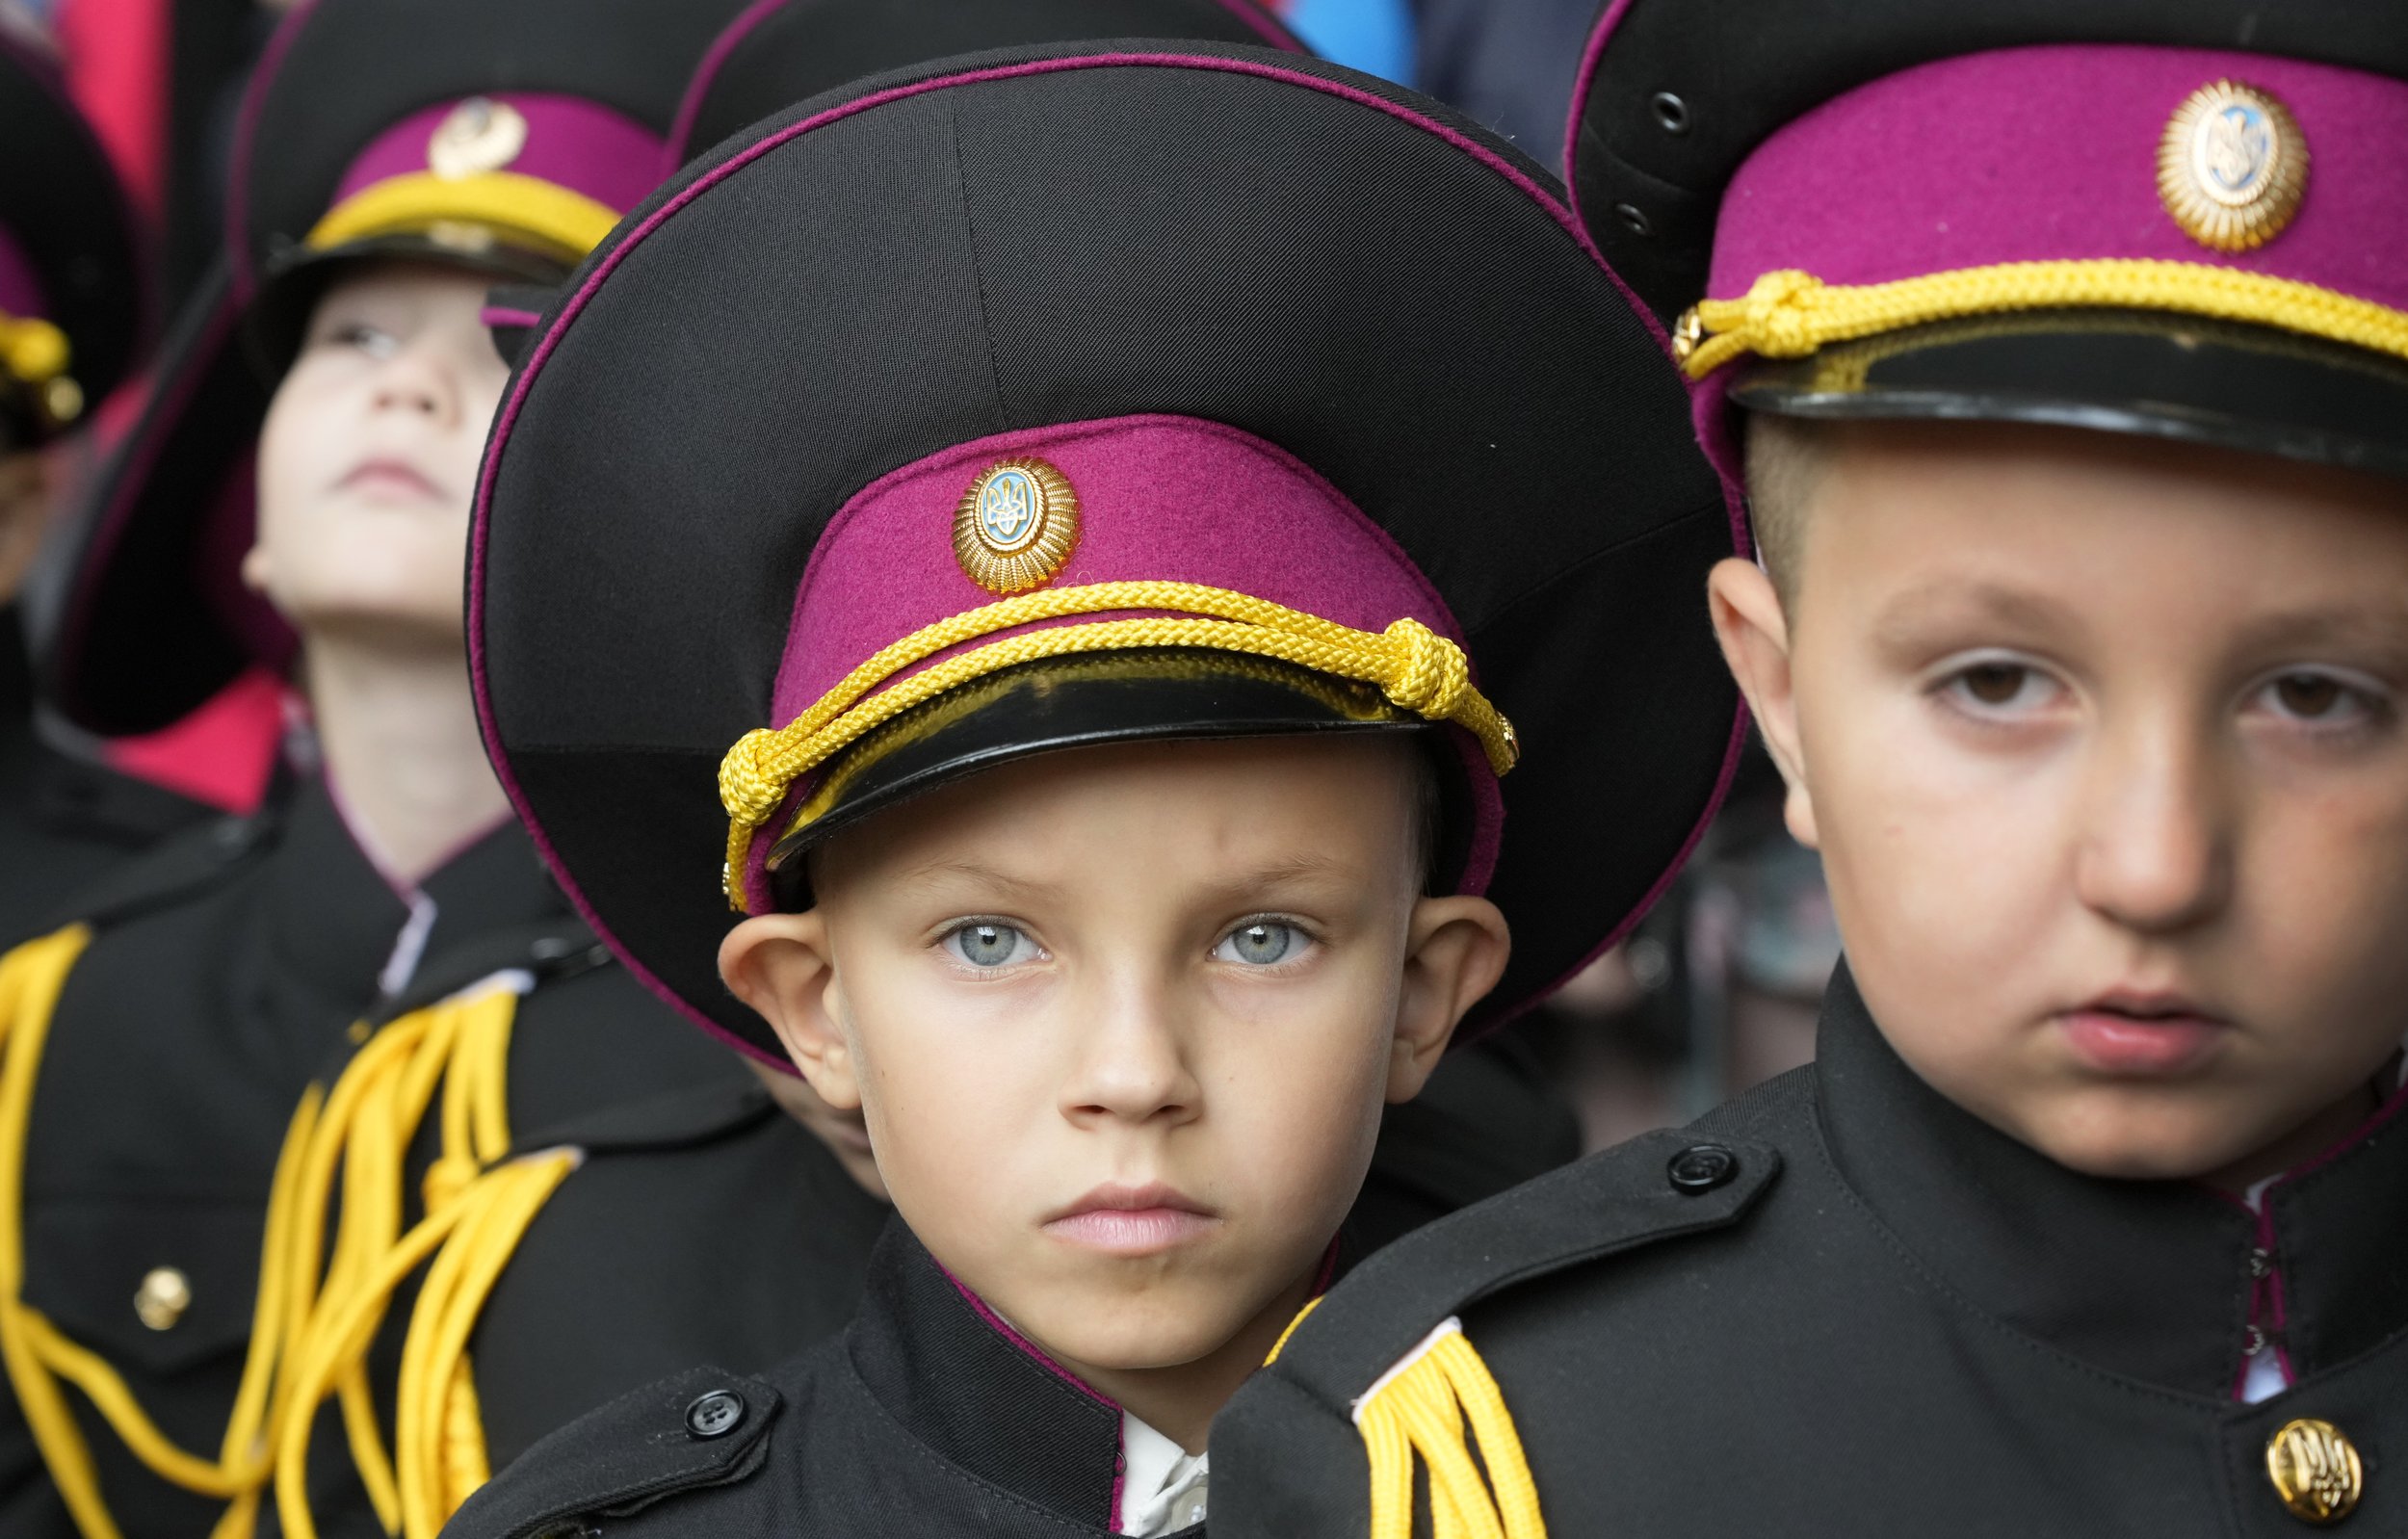  Young cadets attend a ceremony on the first day of school at a cadet lyceum in Kyiv, Ukraine, on Sept. 1, 2021. Ukraine marks Sept. 1 as Knowledge Day, the traditional launch of the academic year. (AP Photo/Efrem Lukatsky) 